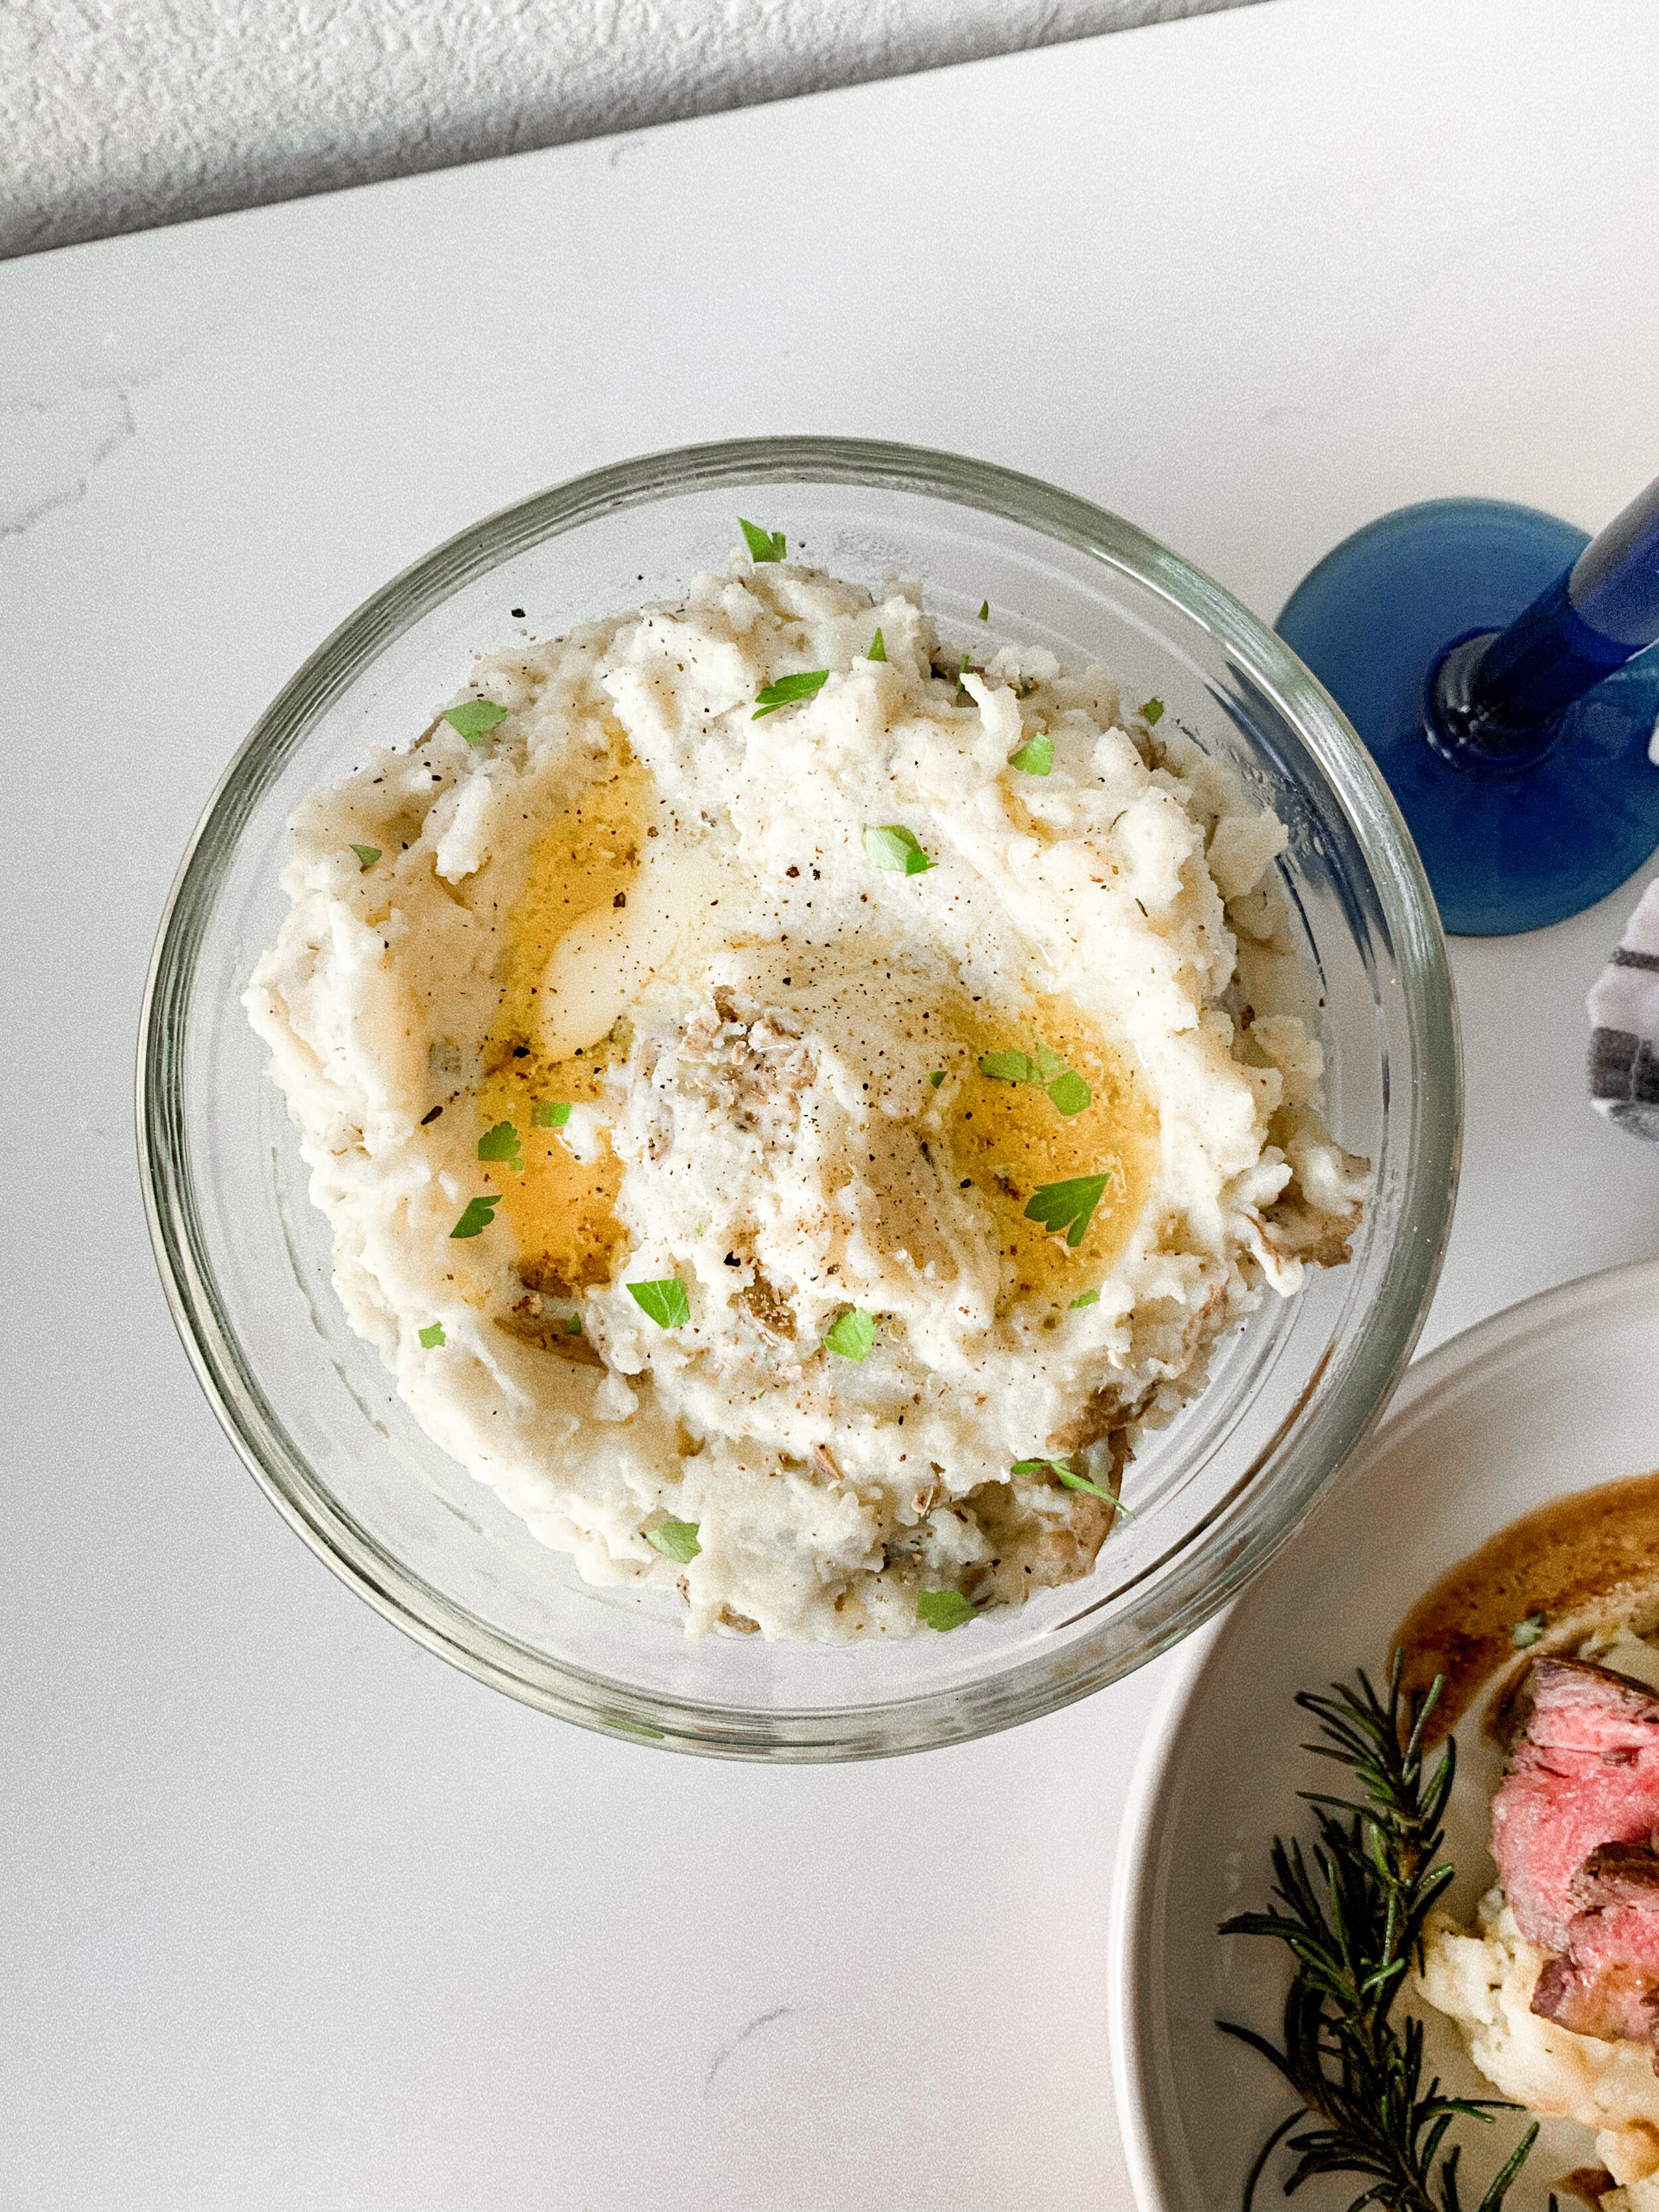 The plated 4-ingredient mashed potatoes topped with melted butter and parsley